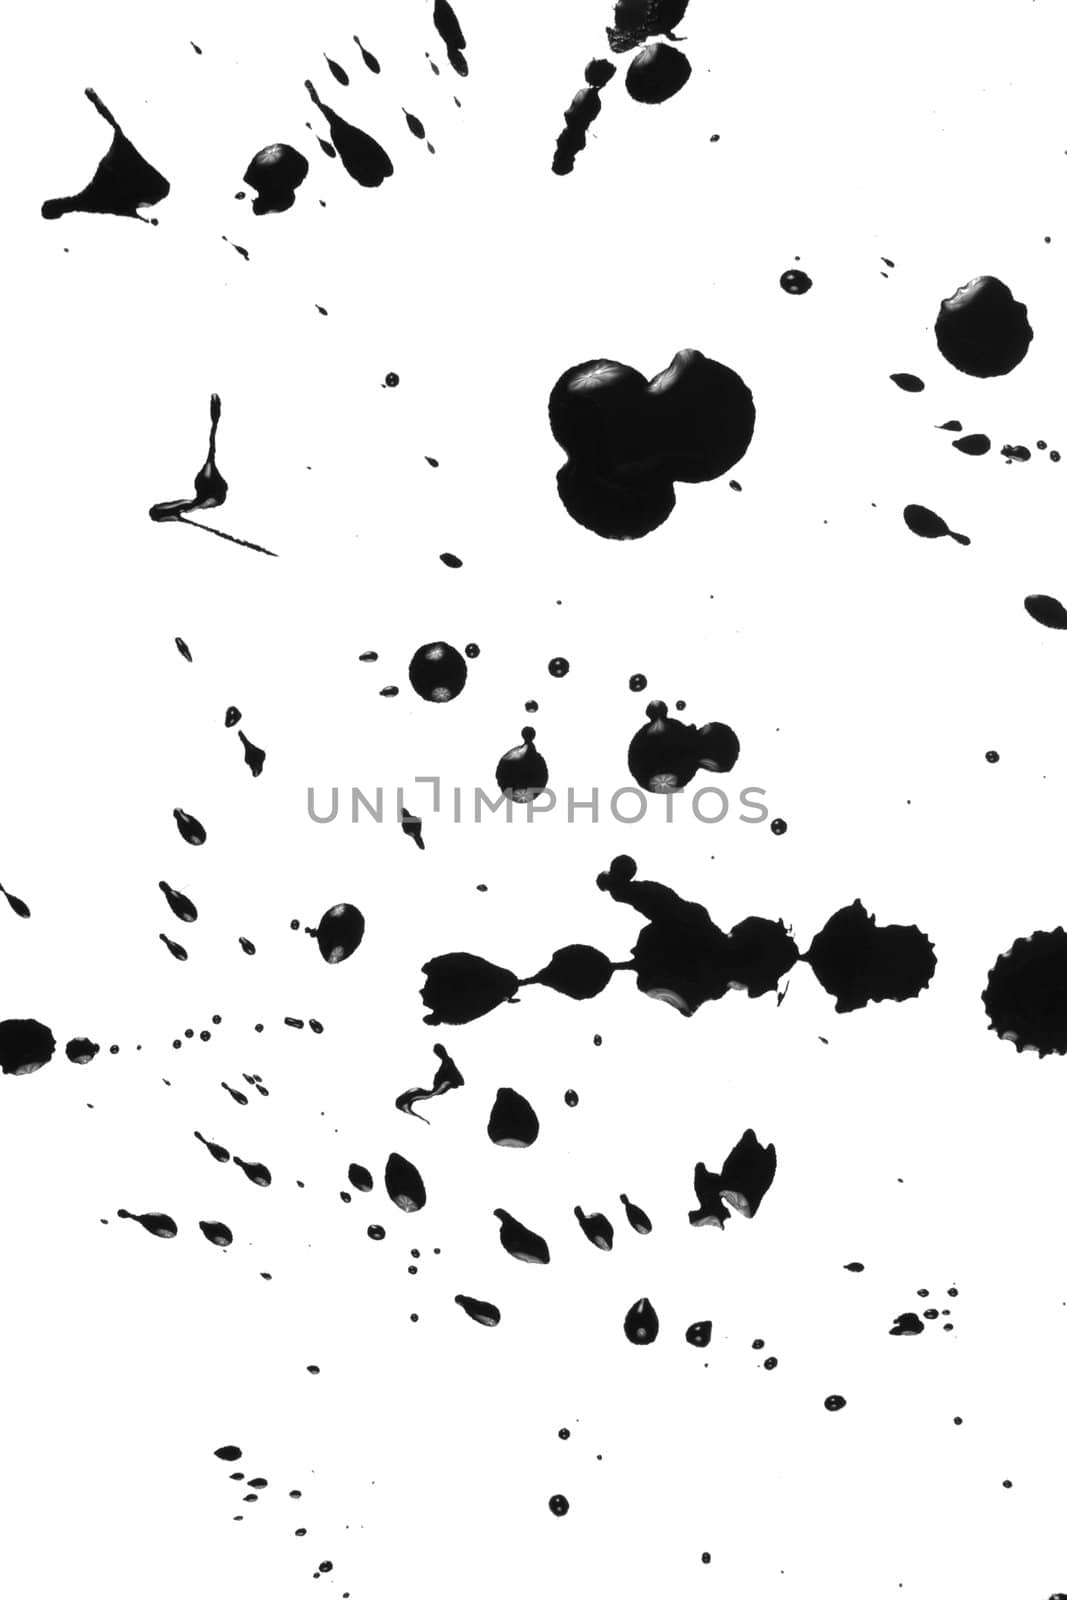 stain from ink abstract background, black on white